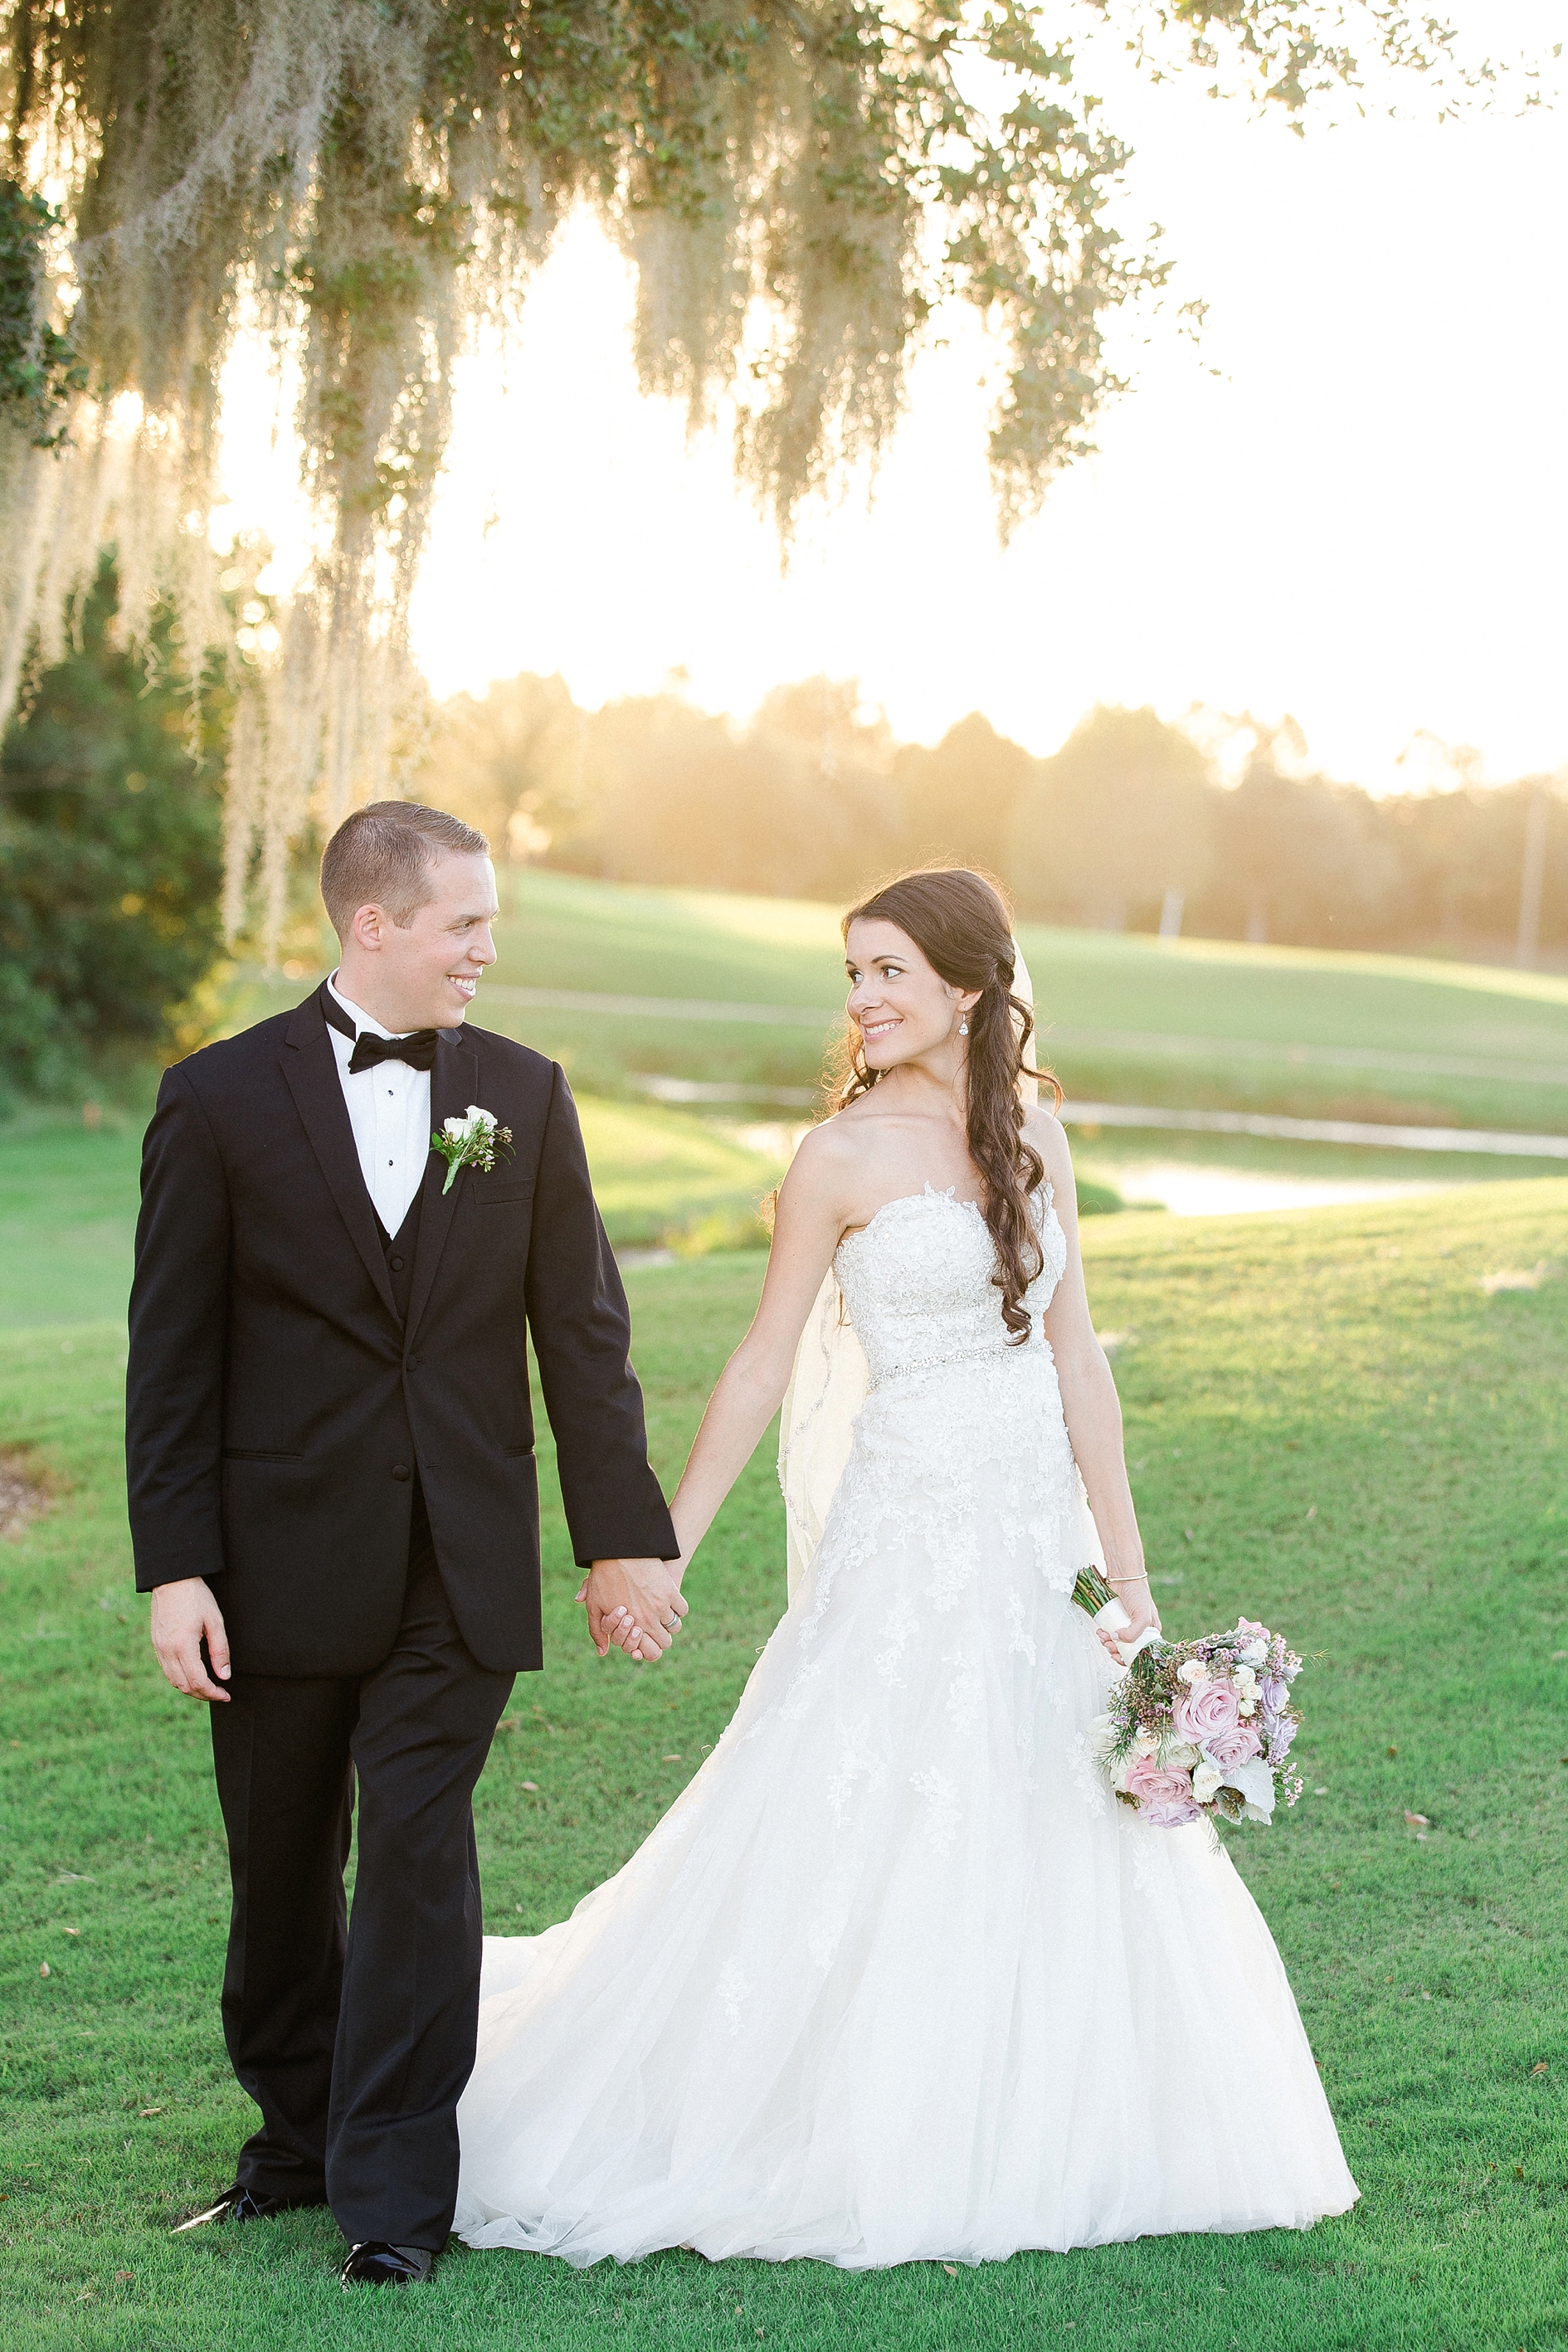 Lakewood Ranch Country Club Wedding | © Ailyn La Torre Photography 2015